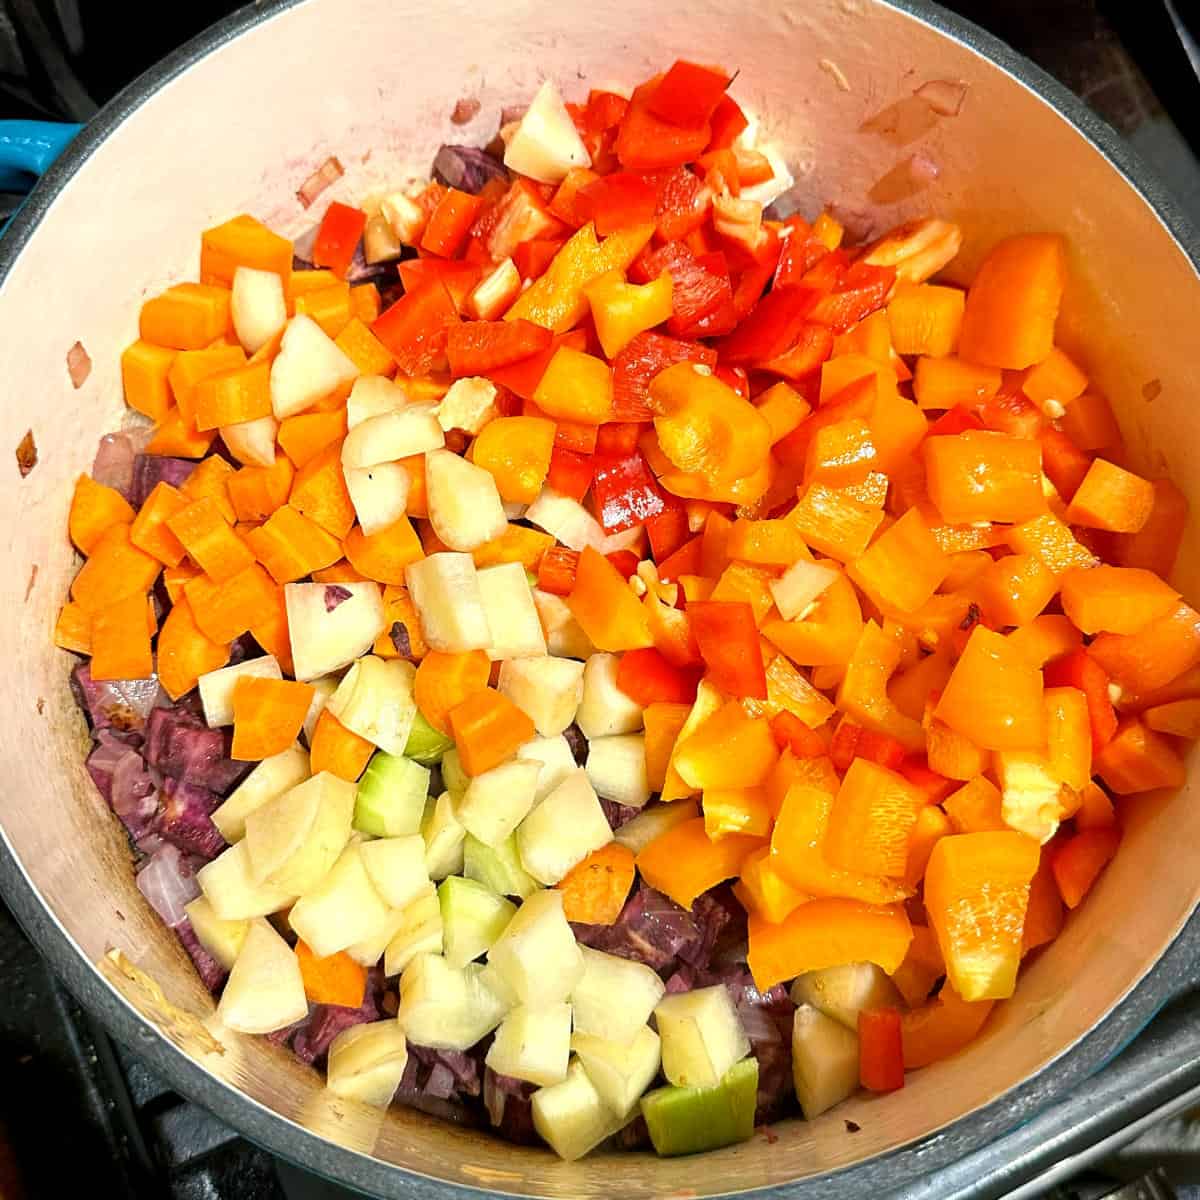 Carrots, bell peppers added to pot with sweet potatoes and onions.